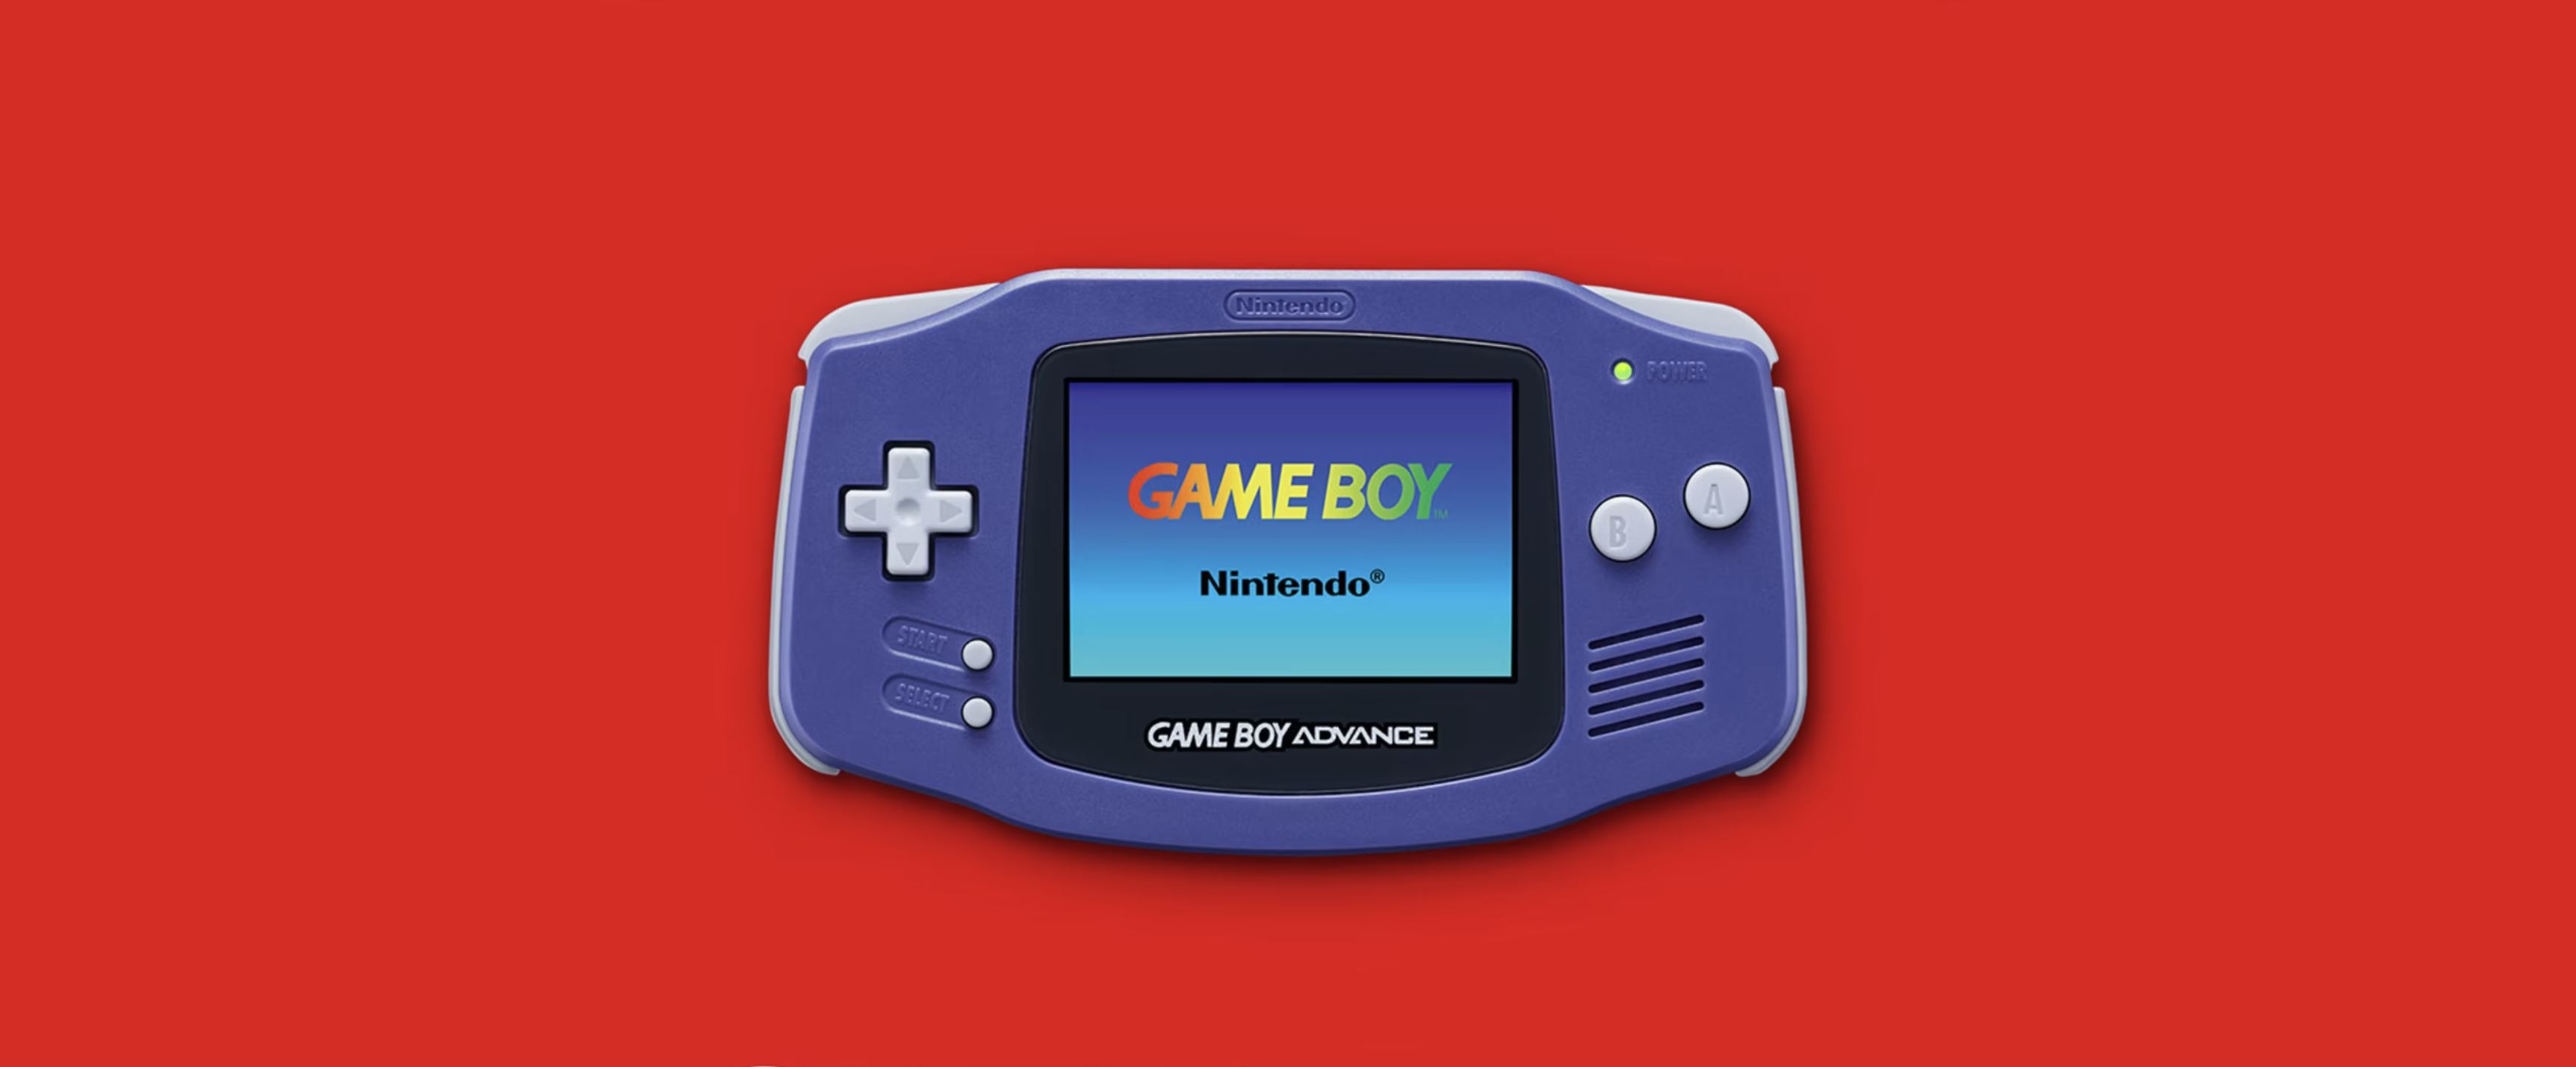 Gameboy and GBA games are finally on Nintendo Switch Online — But